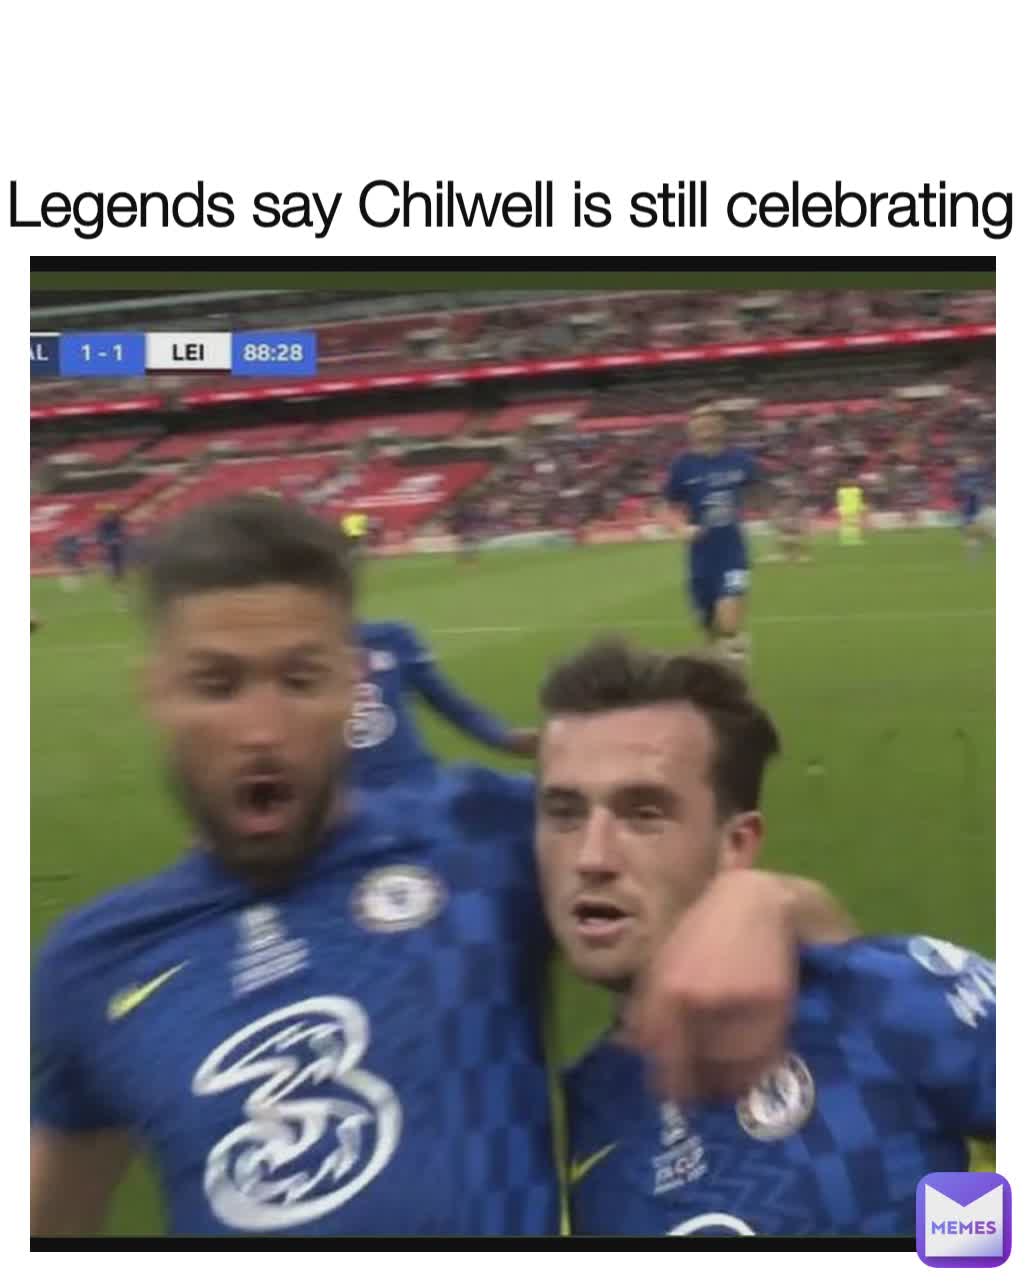 Legends say Chilwell is still celebrating